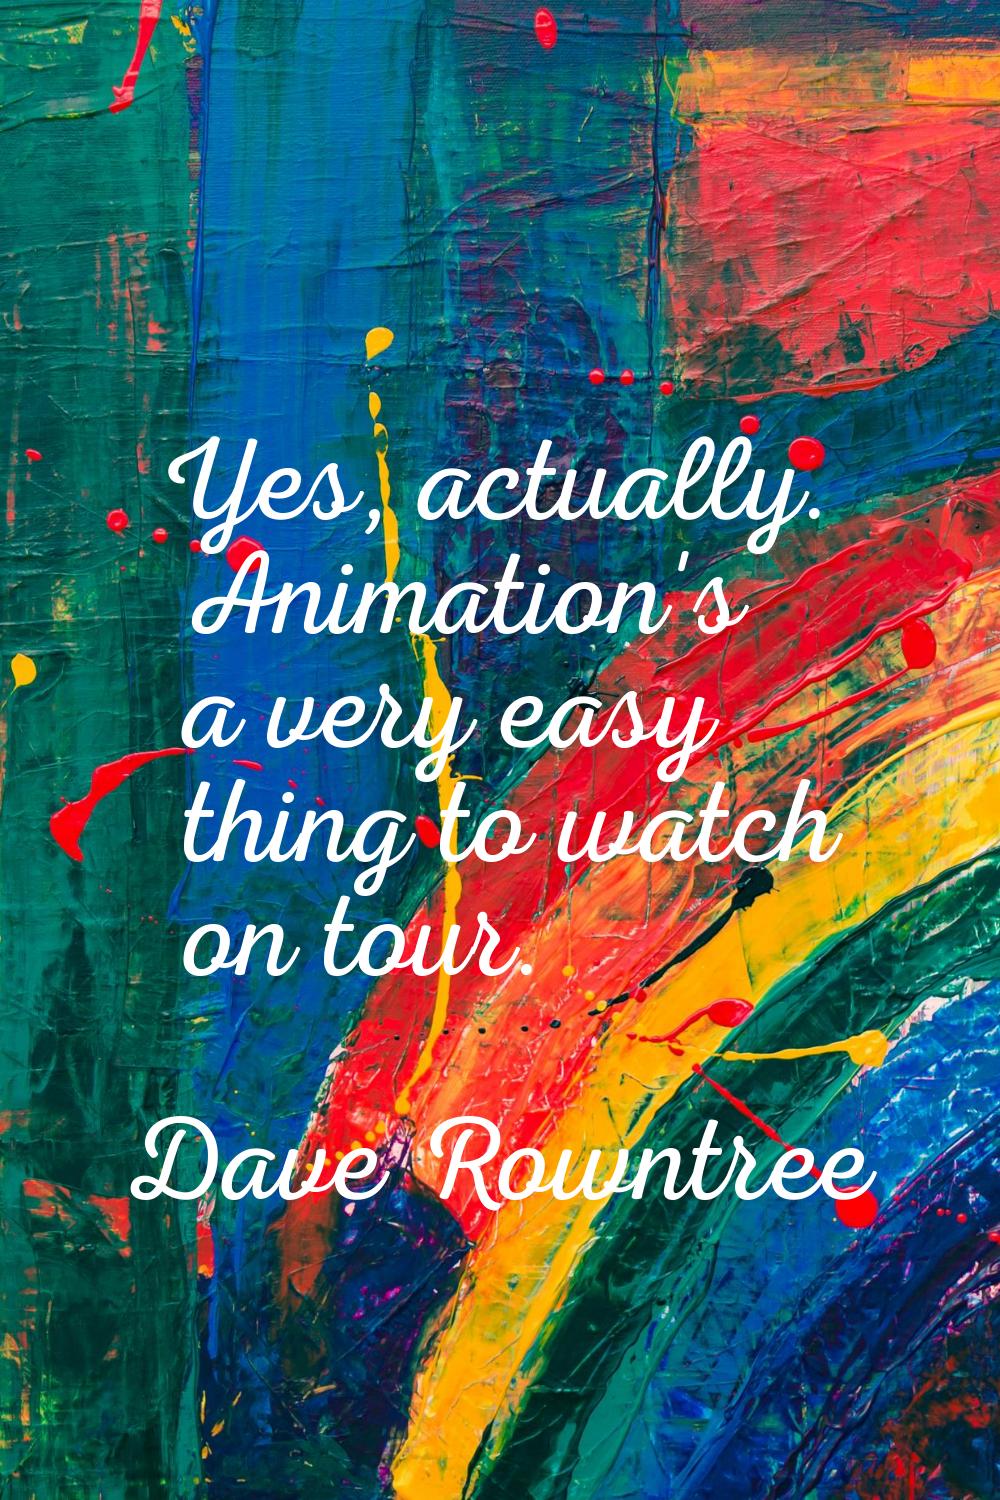 Yes, actually. Animation's a very easy thing to watch on tour.